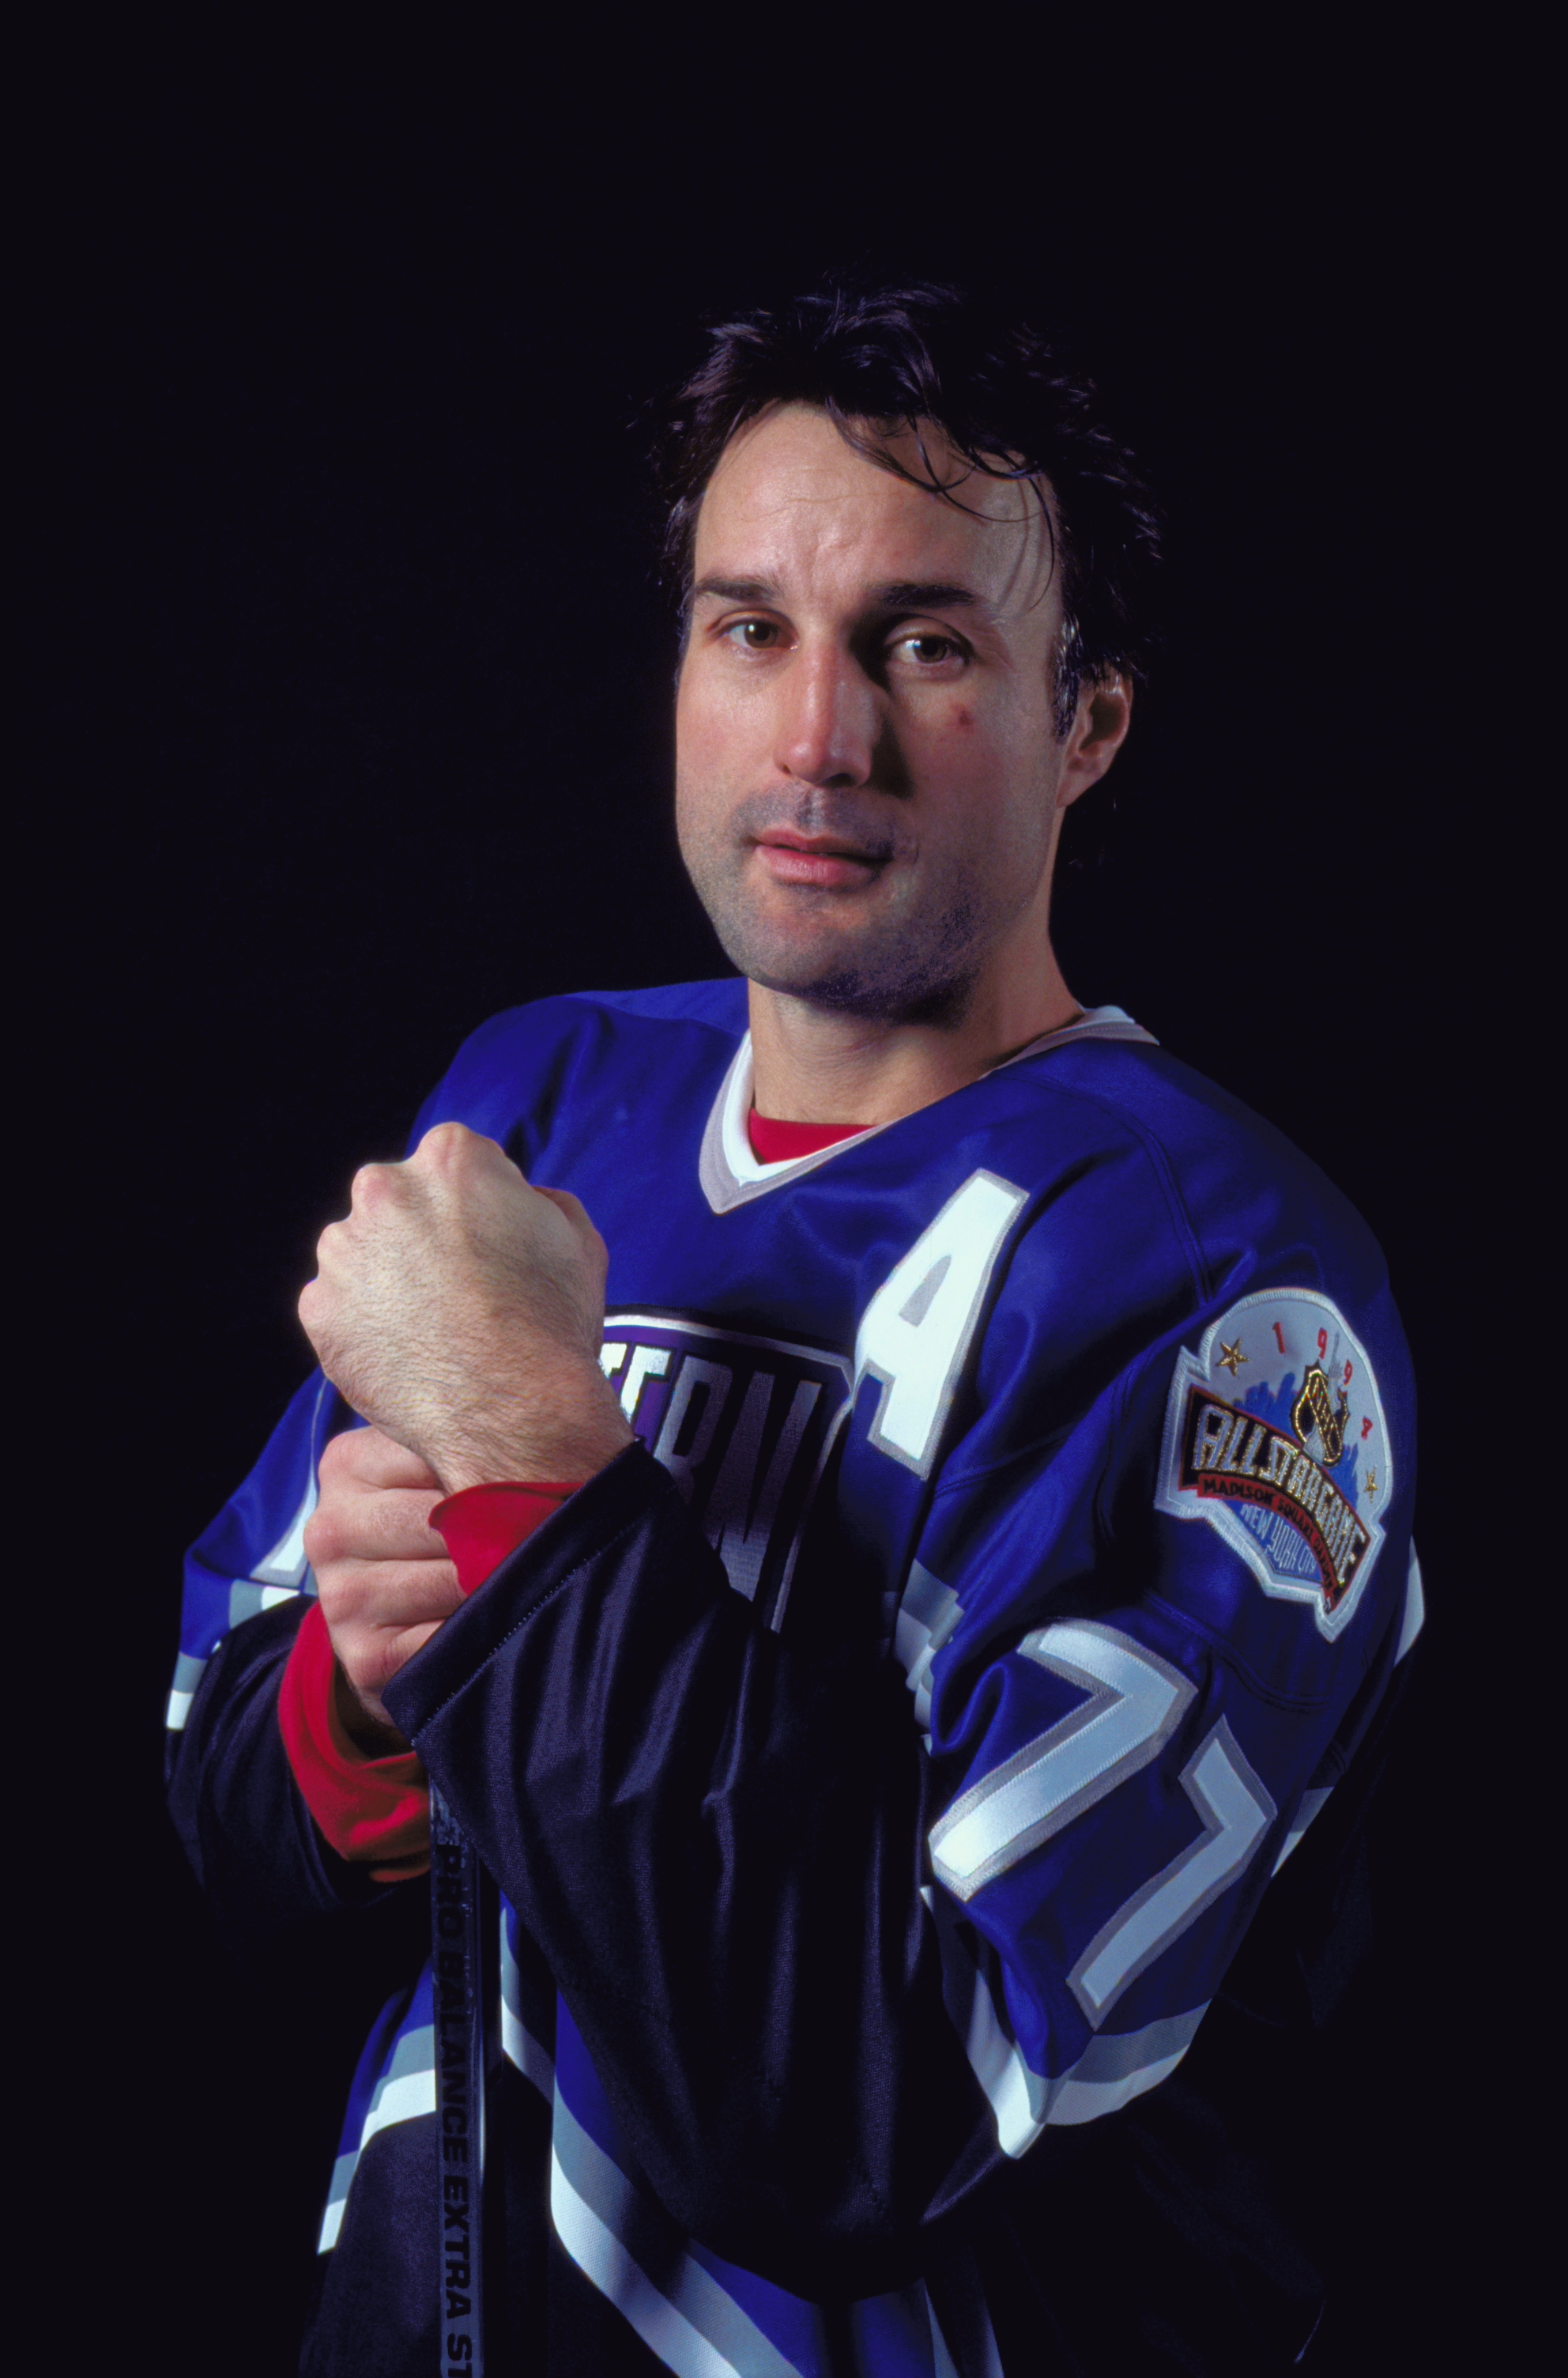 Paul Coffey Archives  Pittsburgh Hockey Now